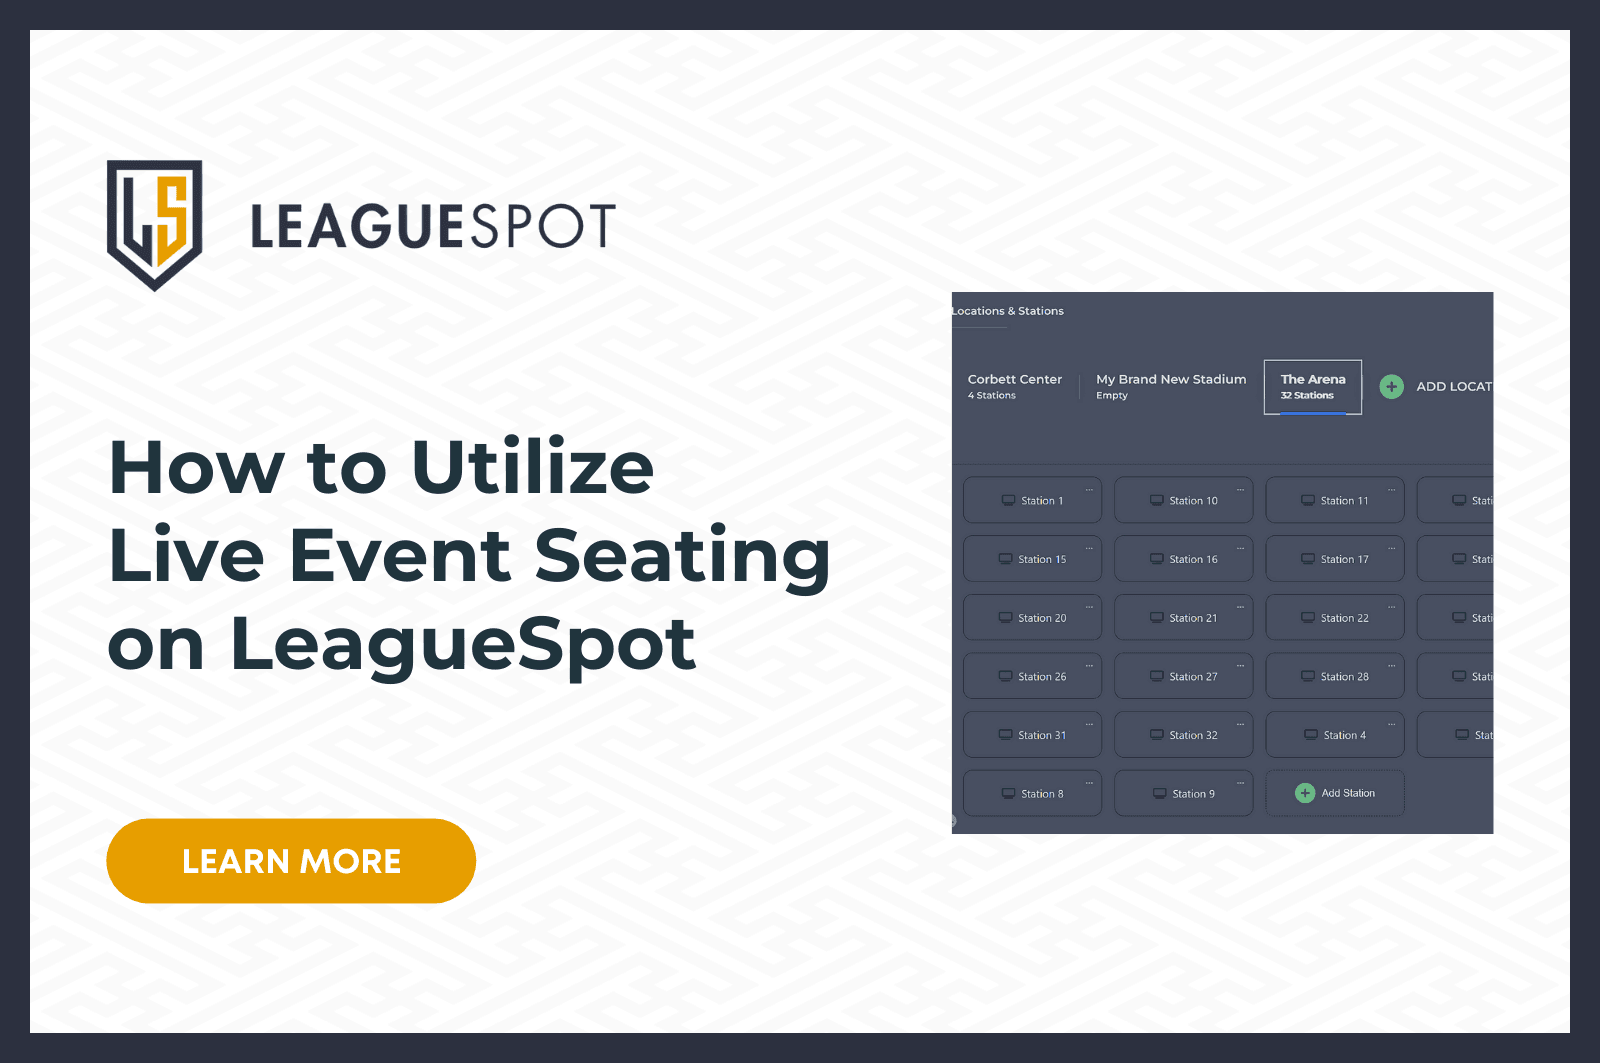 How to Utilize Live Event Seating on League Spot